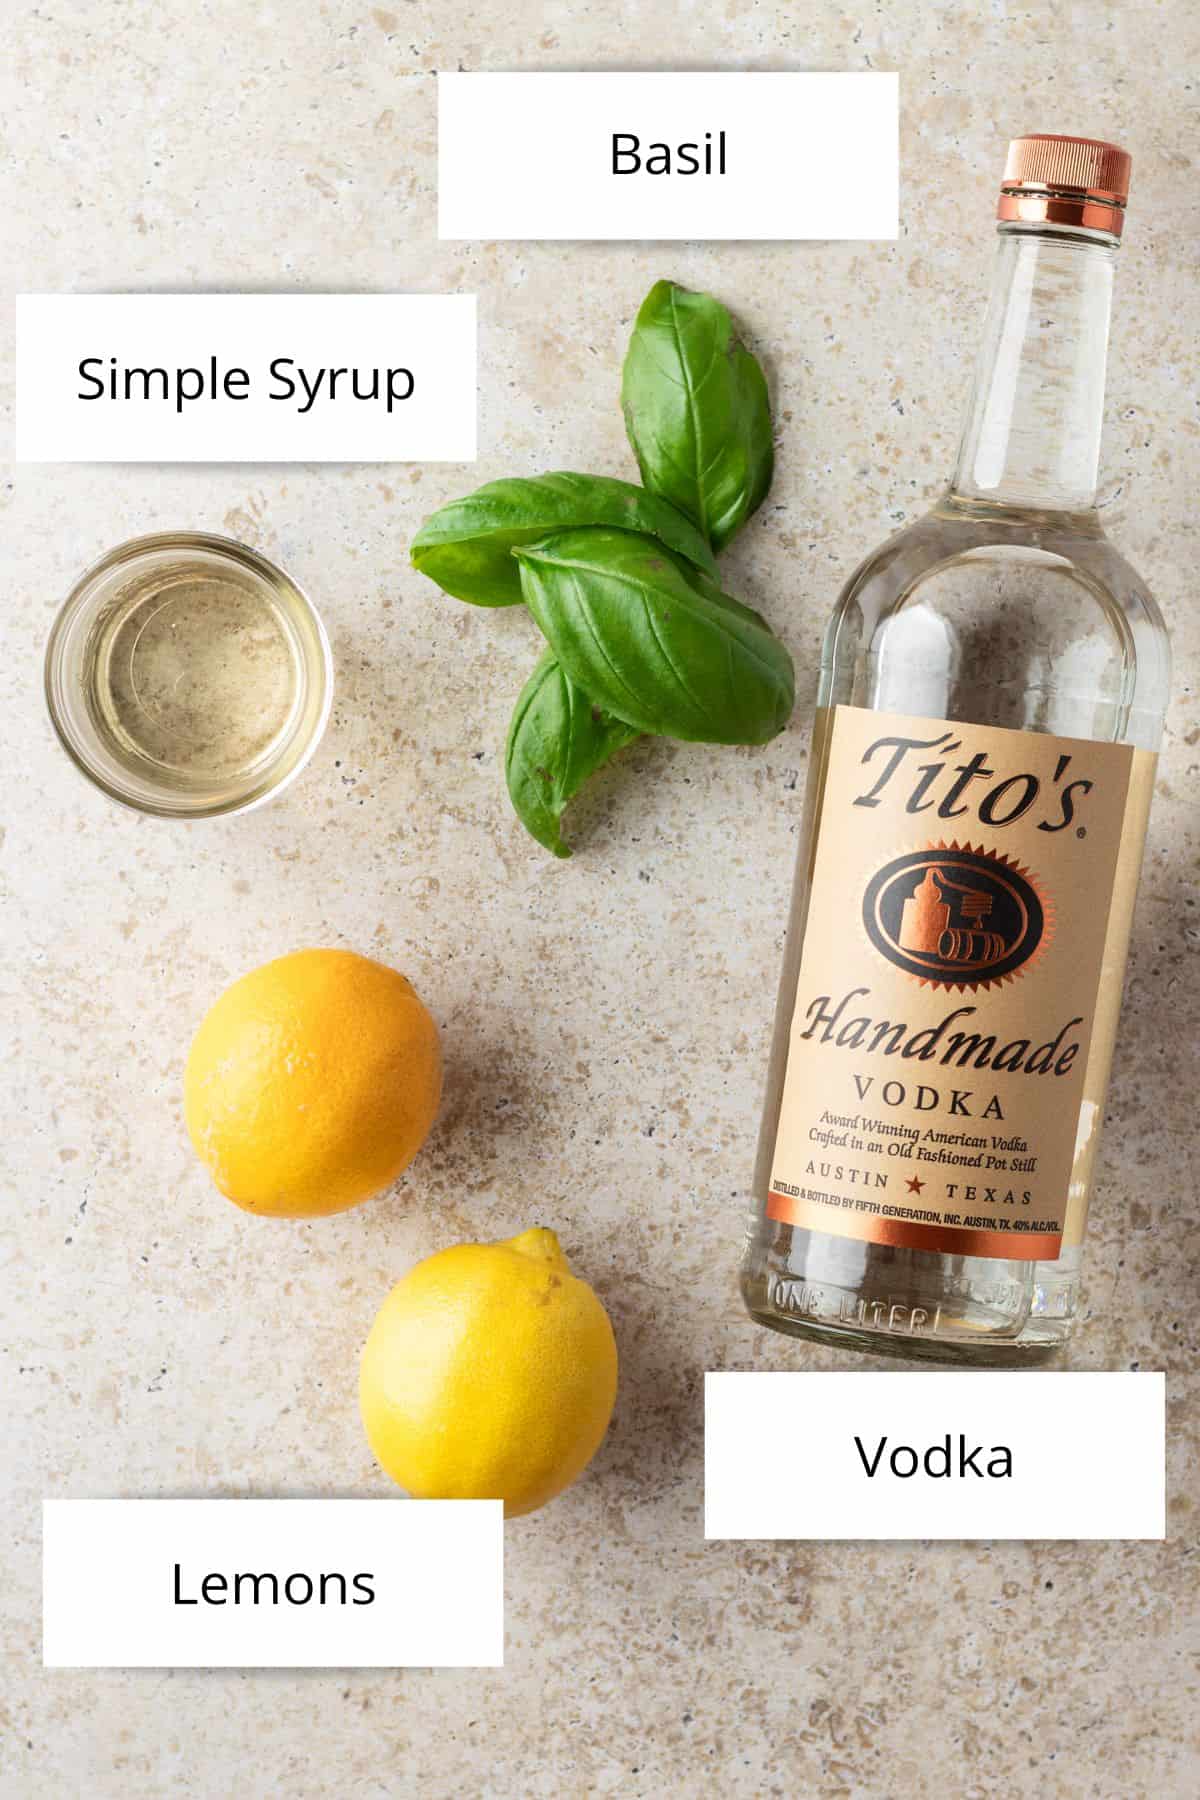 A bottle of Tito's vodka, two lemons, a jar of simple syrup and four basil leaves.